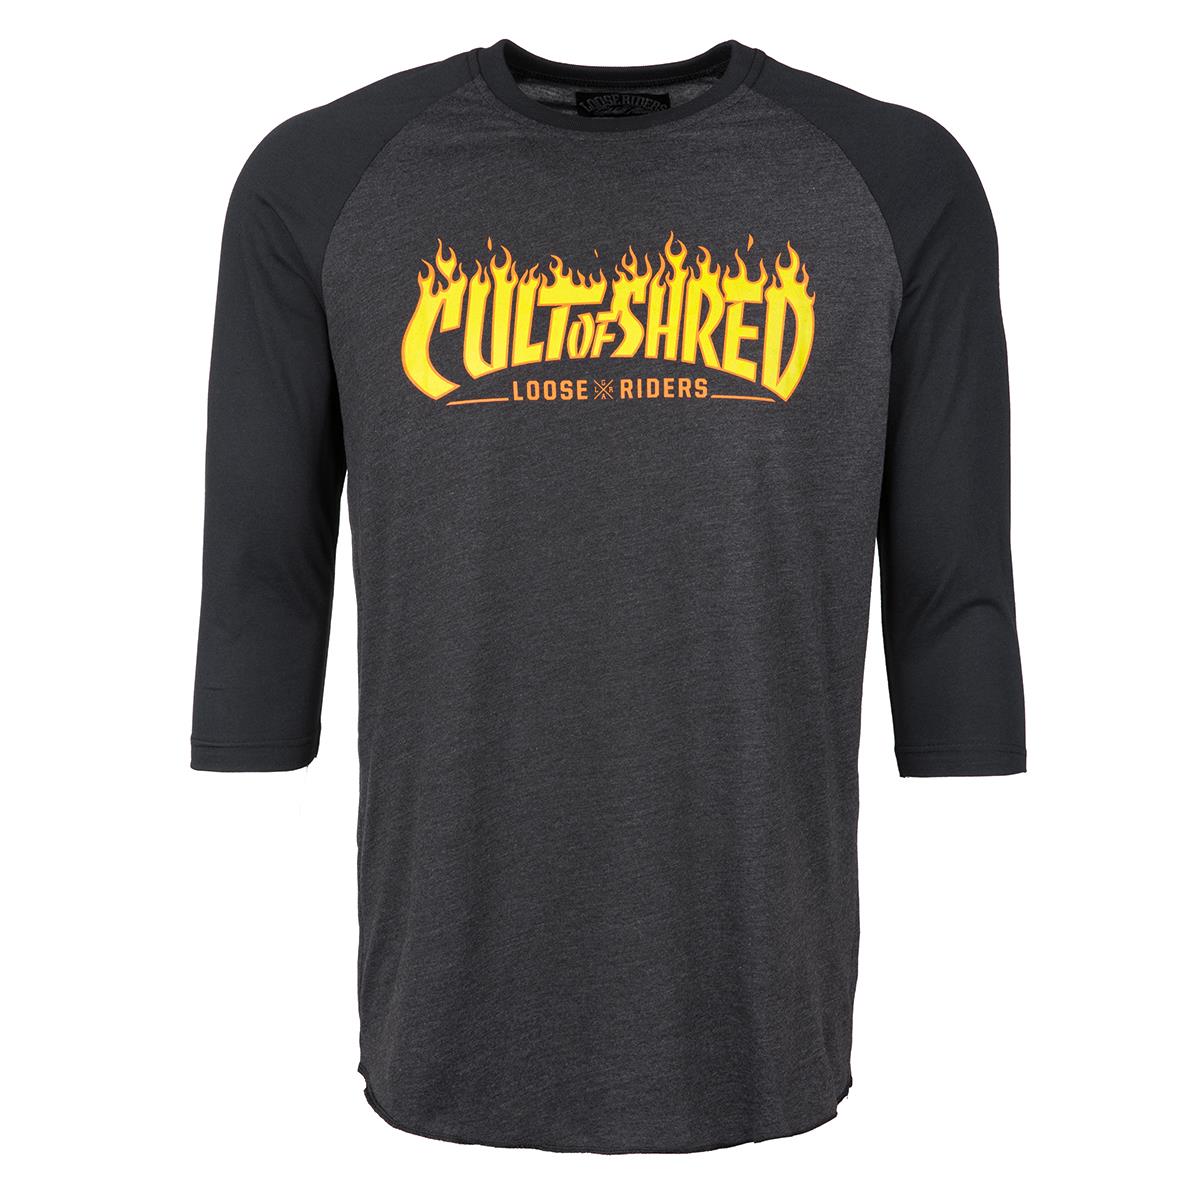 Loose Riders T-Shirt Manches 3/4 Cult of Shred Grey/Black